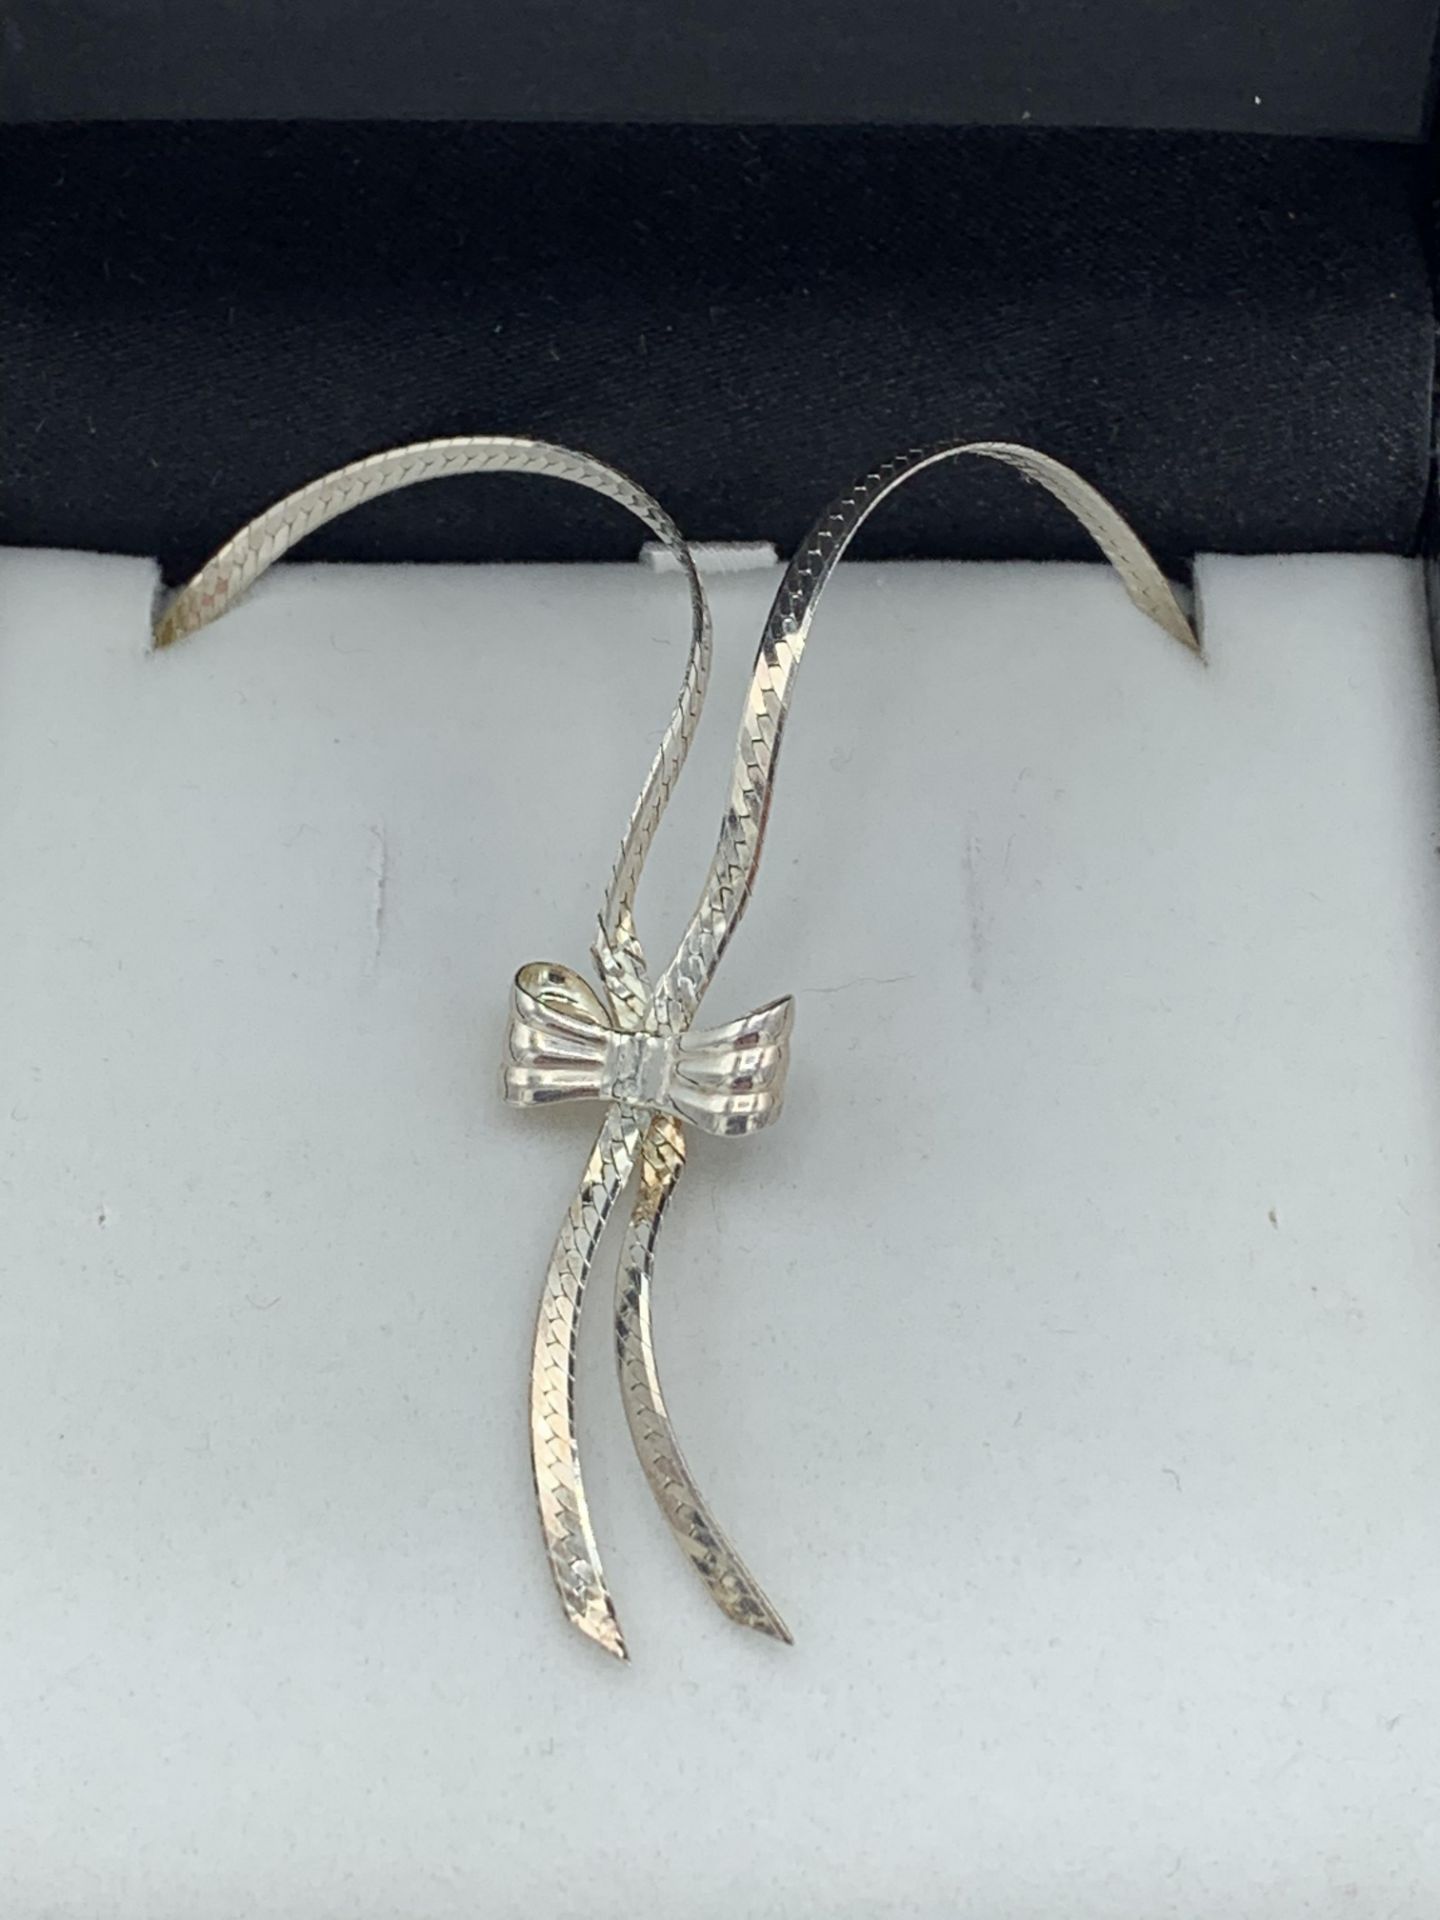 Italian silver 925, flat snake links bow necklace in box. Estimate £25-30.